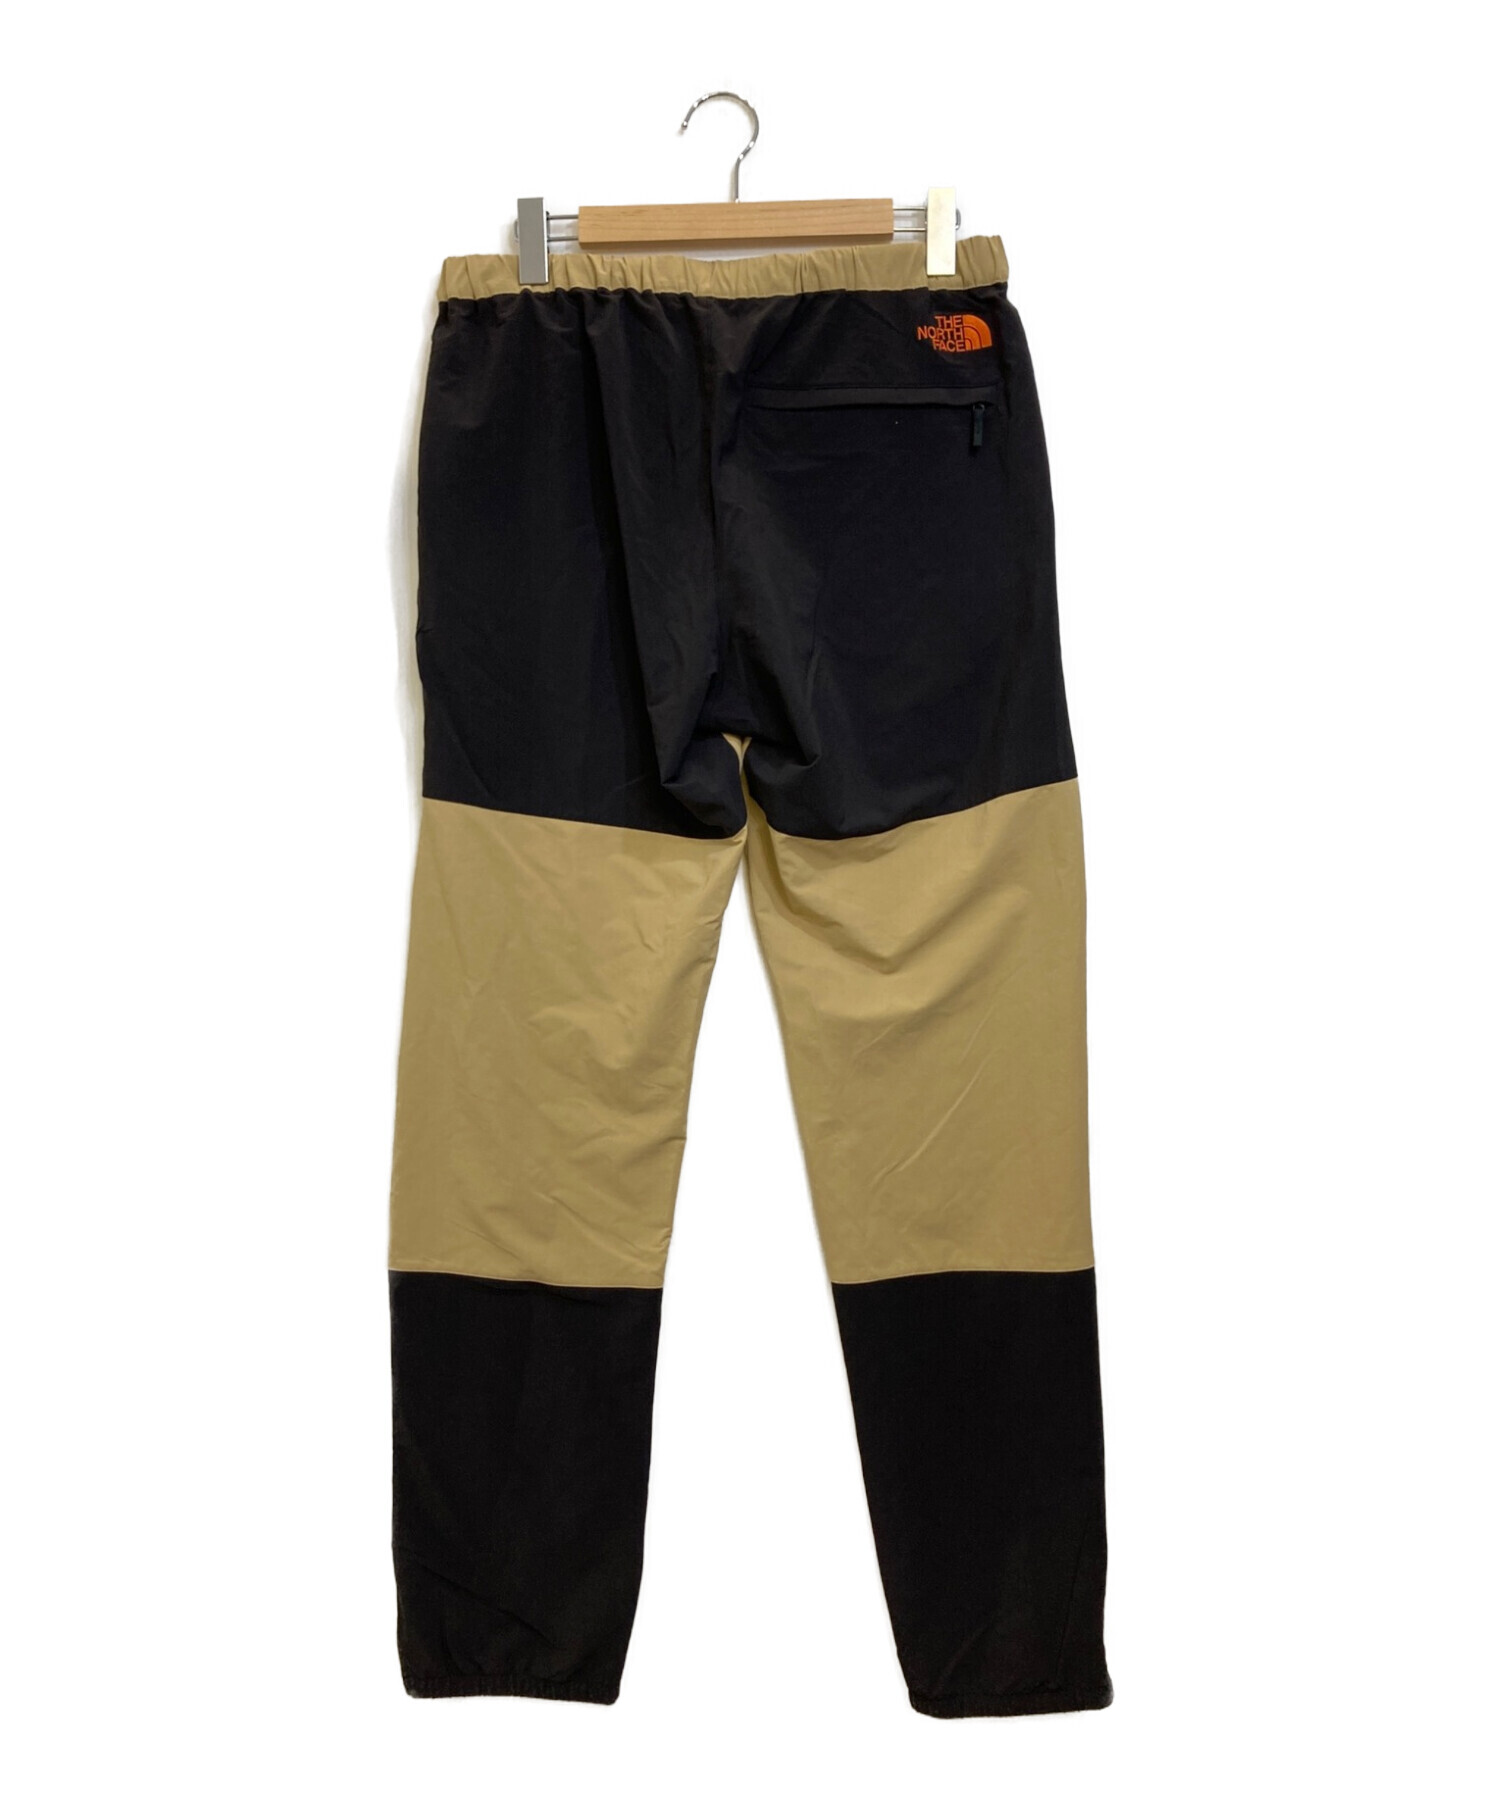 THE NORTH FACE EXPEDITION LIGHT PANT